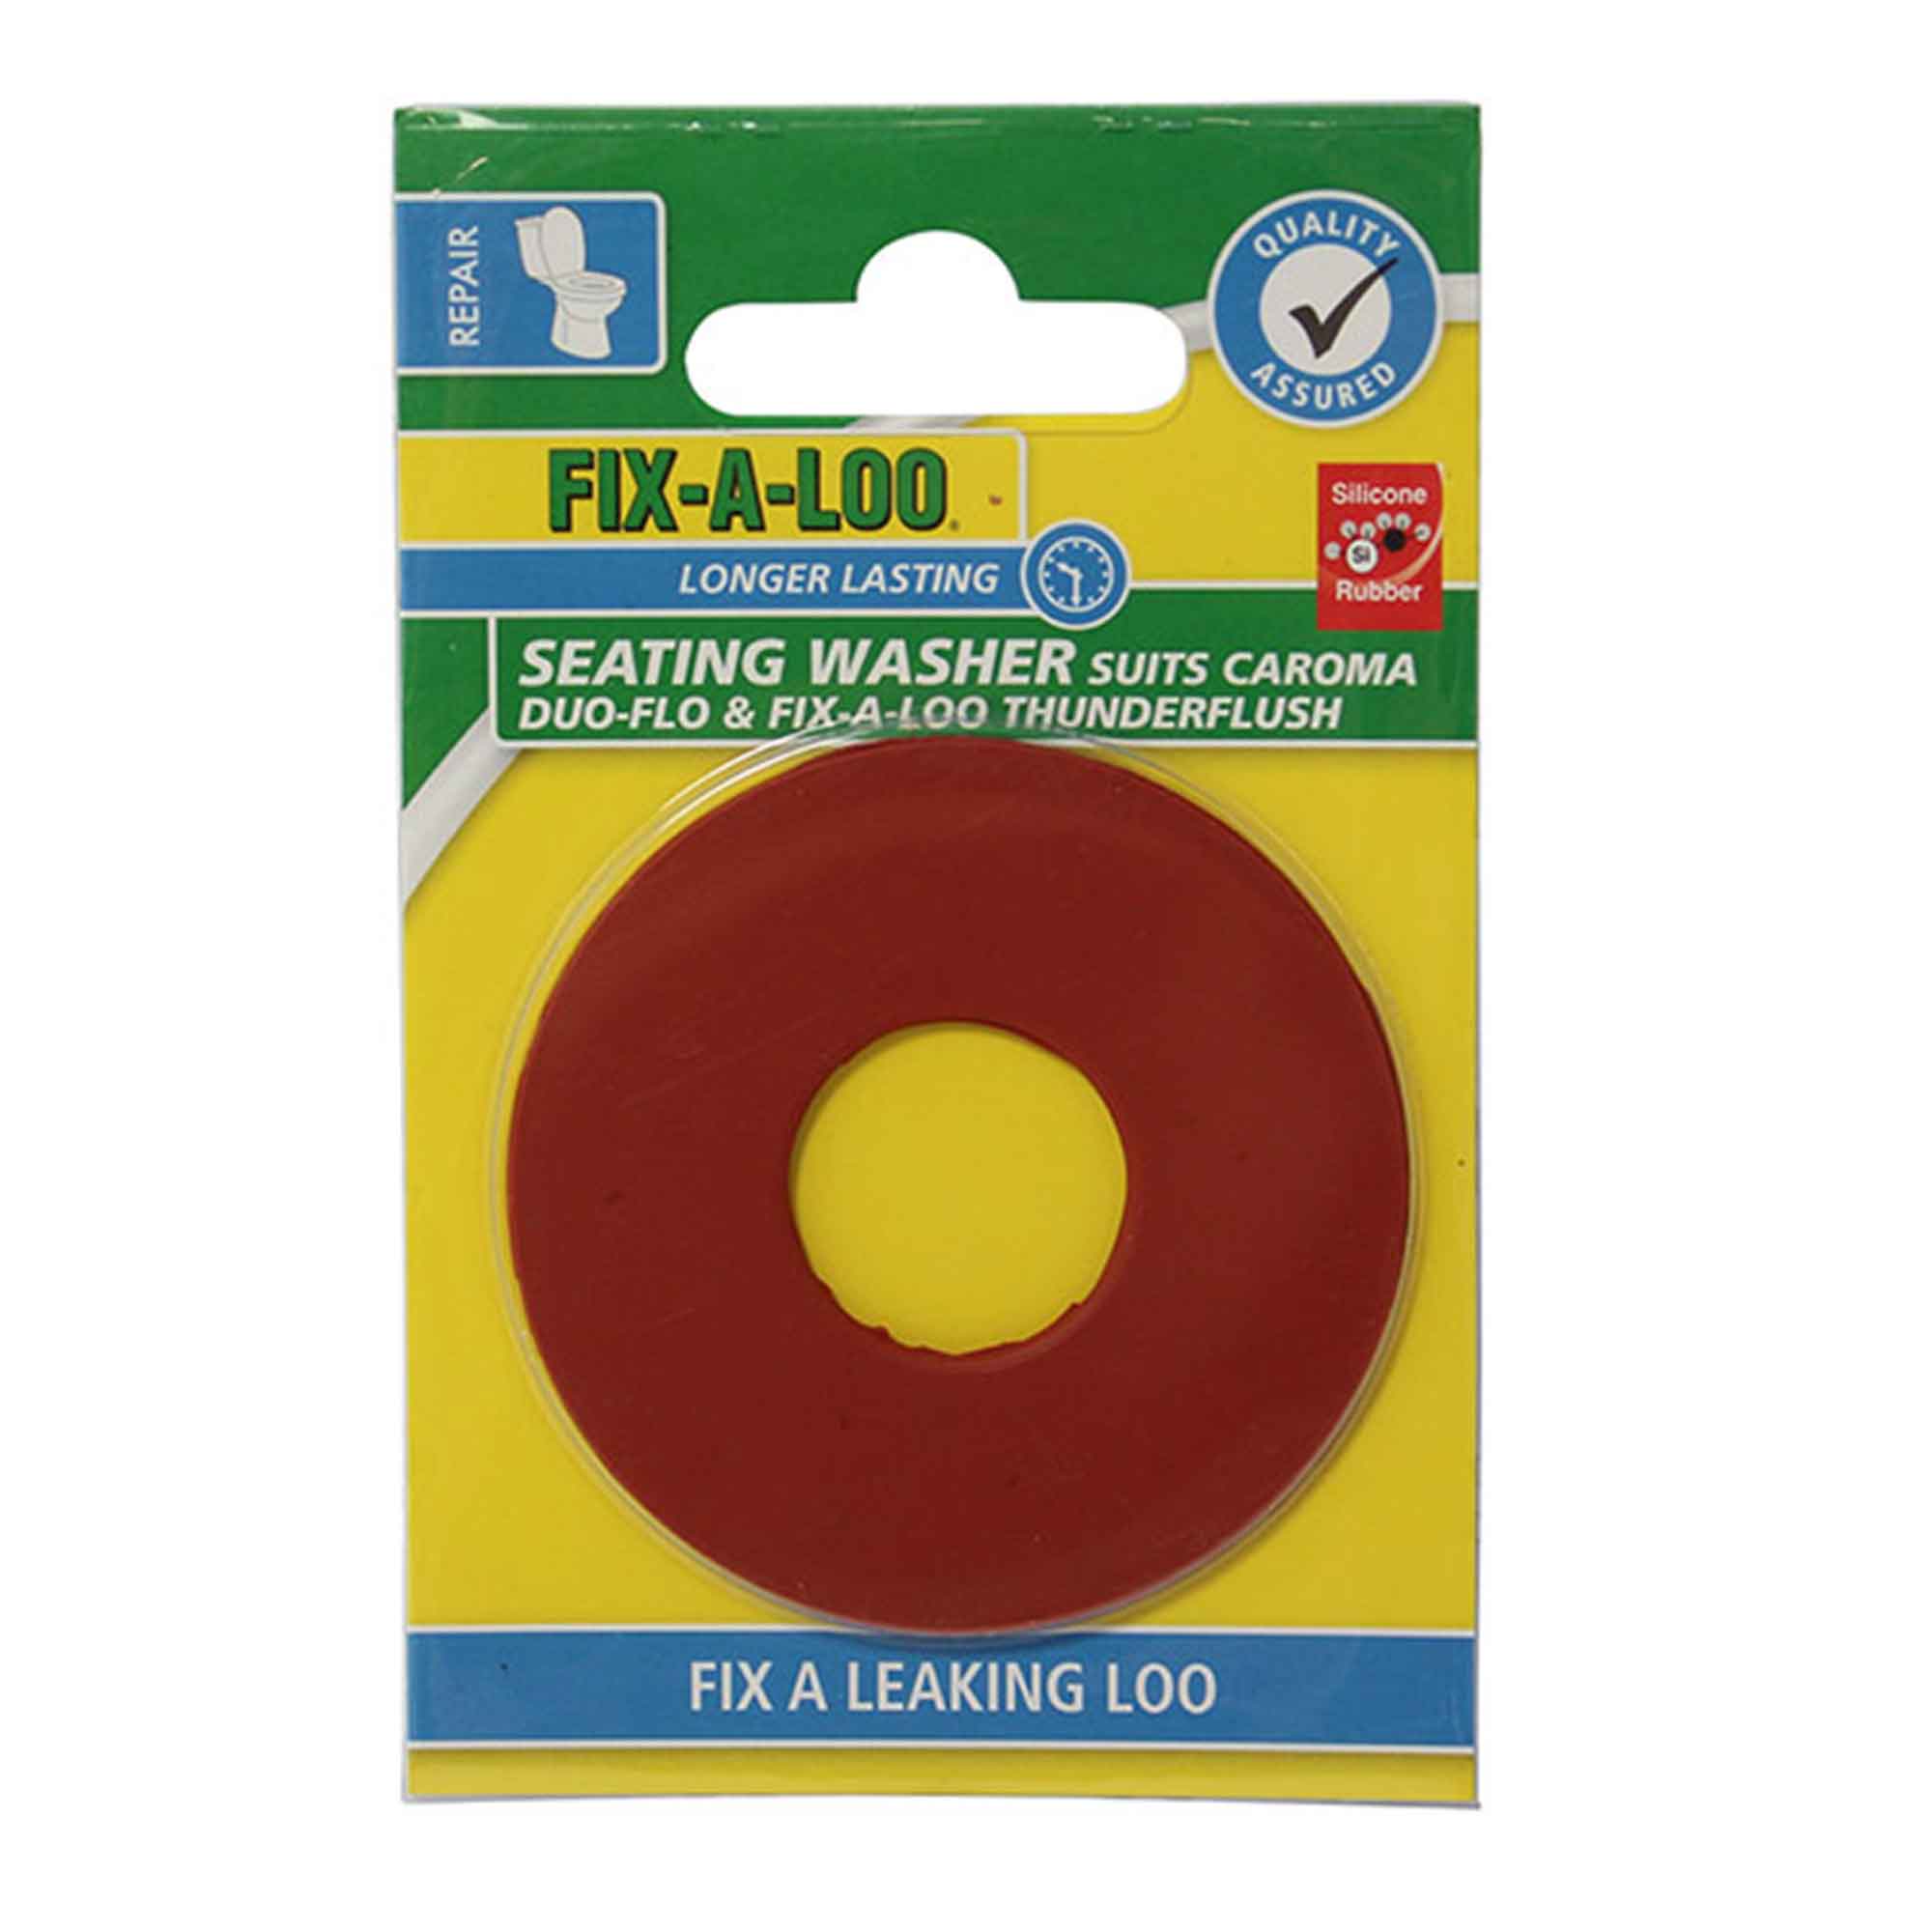 FIX-A-LOO Seating Washer Suits Caroma #2 226129 - Double Bay Hardware